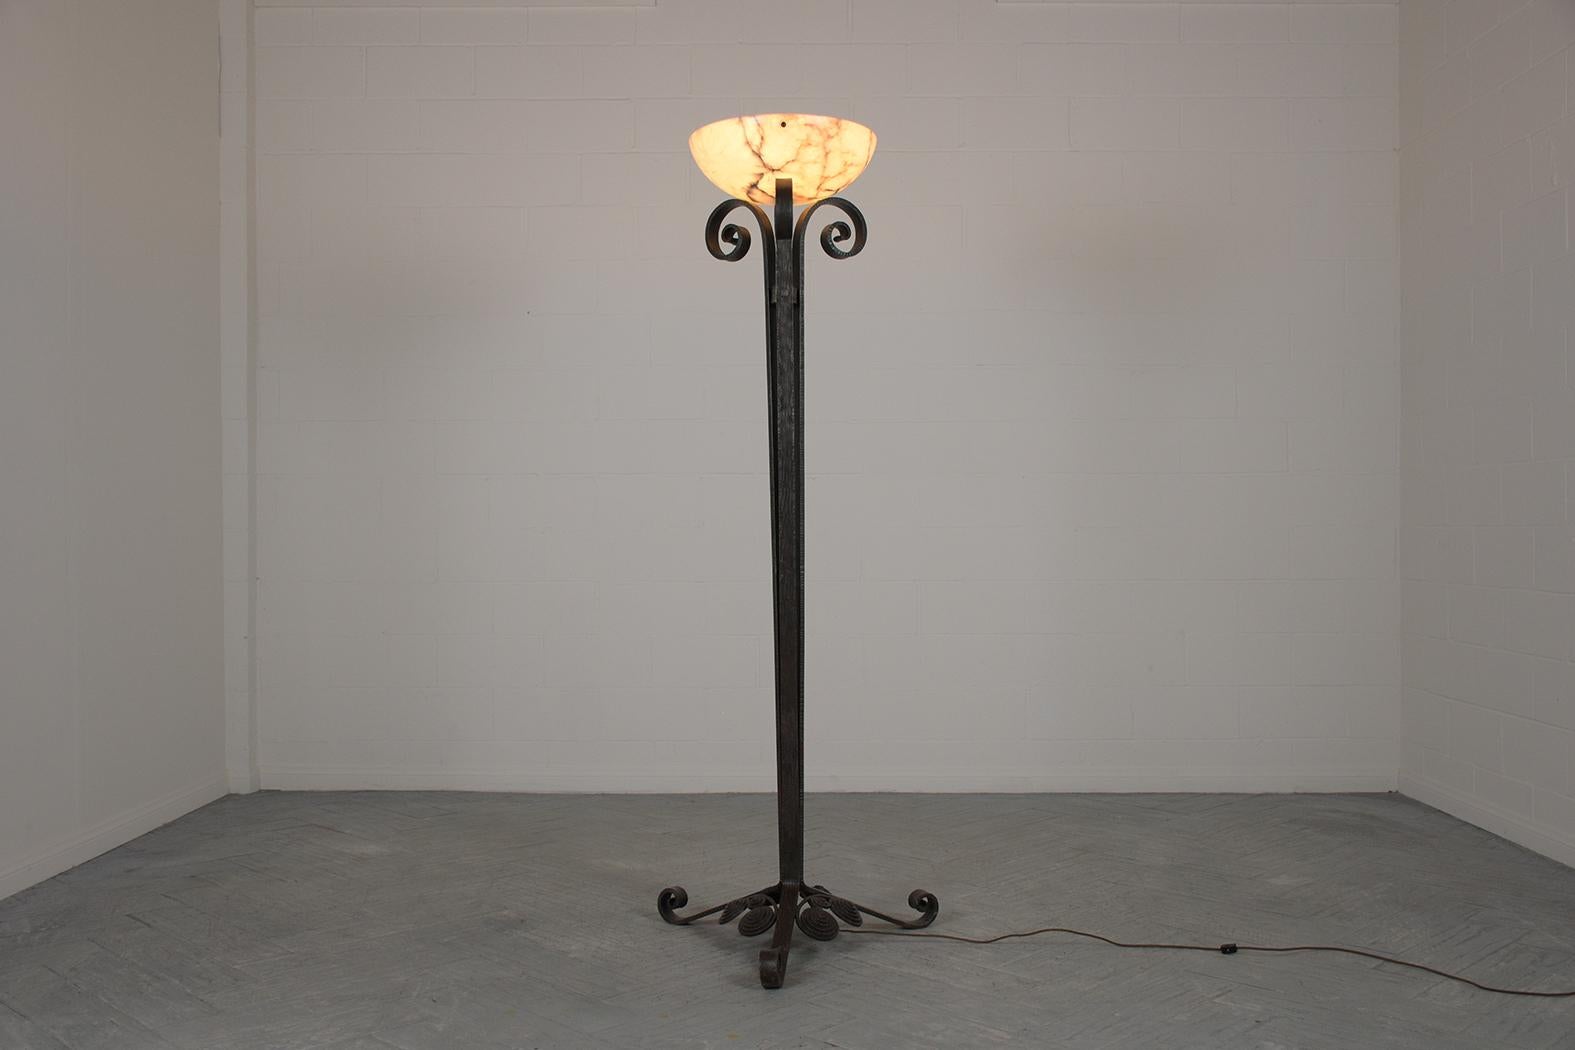 Presenting our meticulously restored 1950s French Art Deco Floor Lamp, masterfully crafted from wrought iron. This exceptional lamp, in top-notch condition, showcases intricate scroll designs at its apex and base, harmoniously complemented by